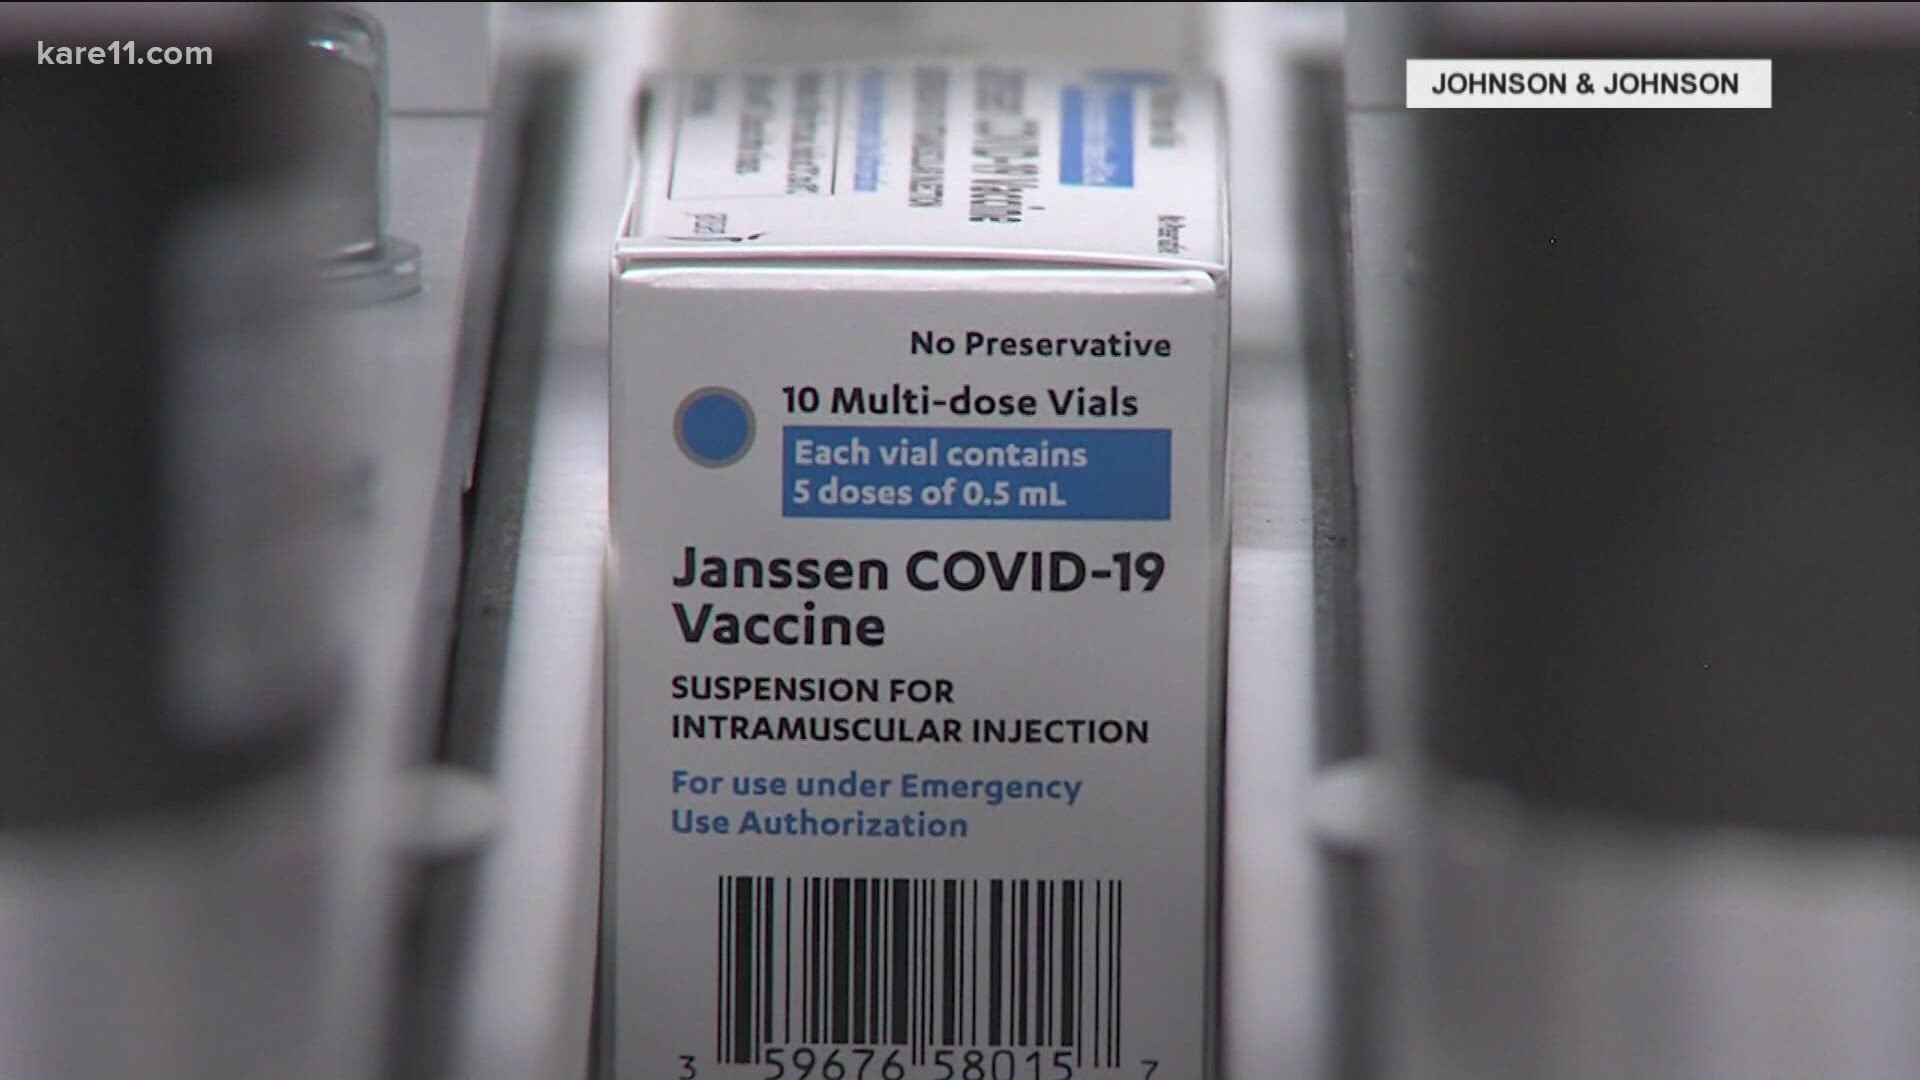 The state had distributed 9,600 doses of the Johnson & Johnson vaccine to Minnesota providers right before the pause on the vaccine.